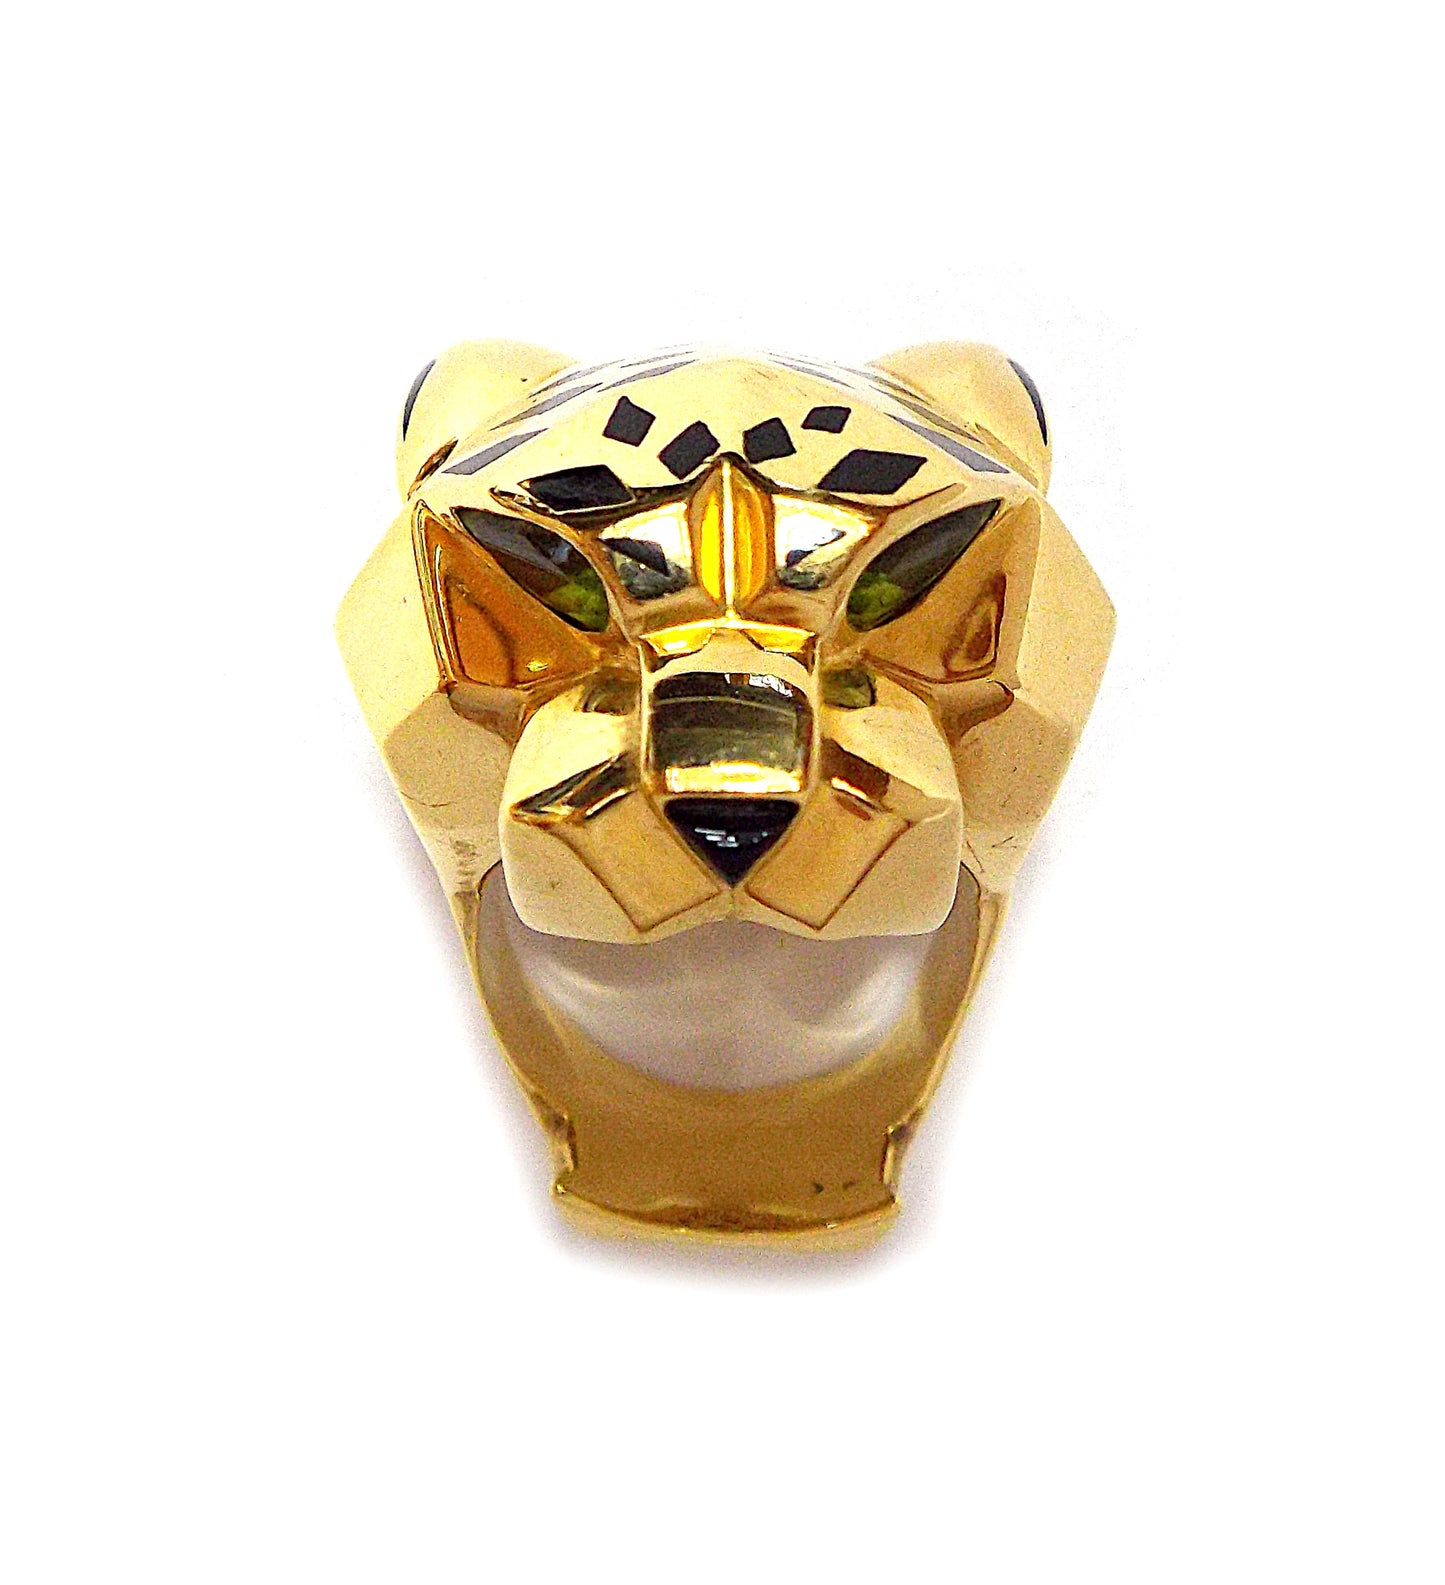 Panthere de Cartier 18K Yellow Gold Ring Size 60